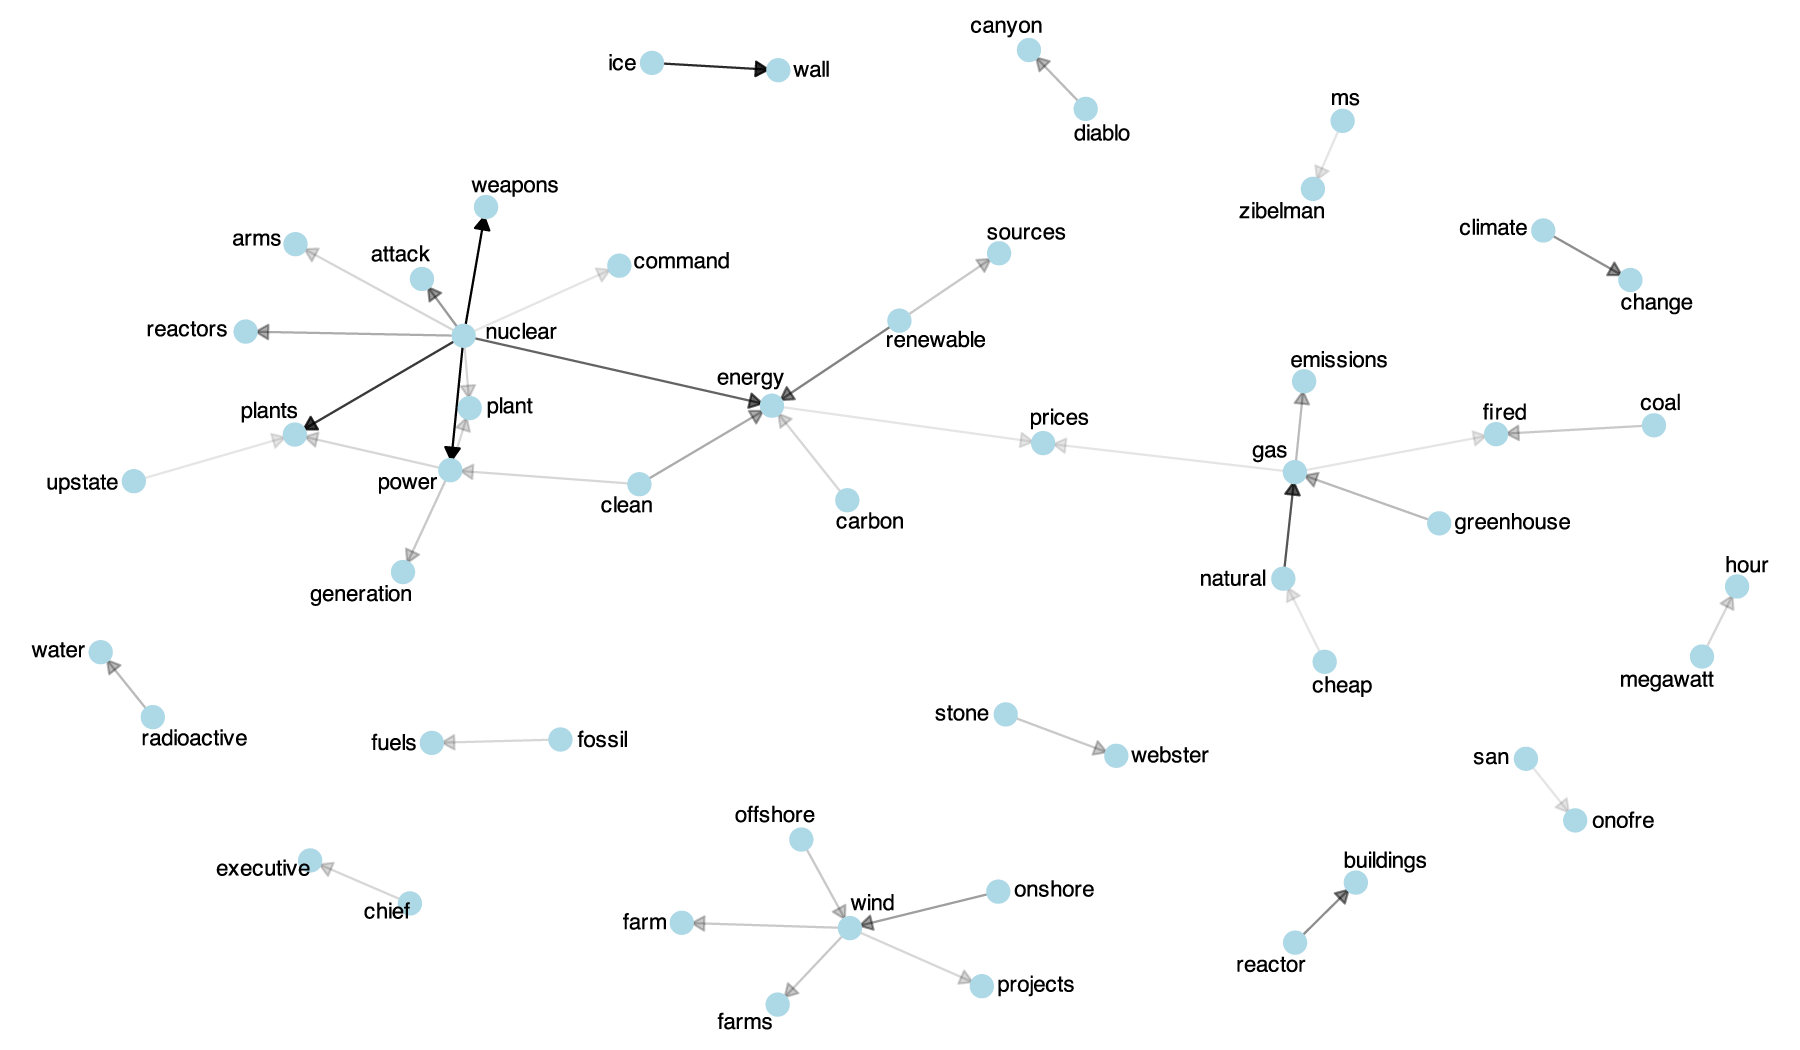 Network map of topics discussed in the news media in 2016